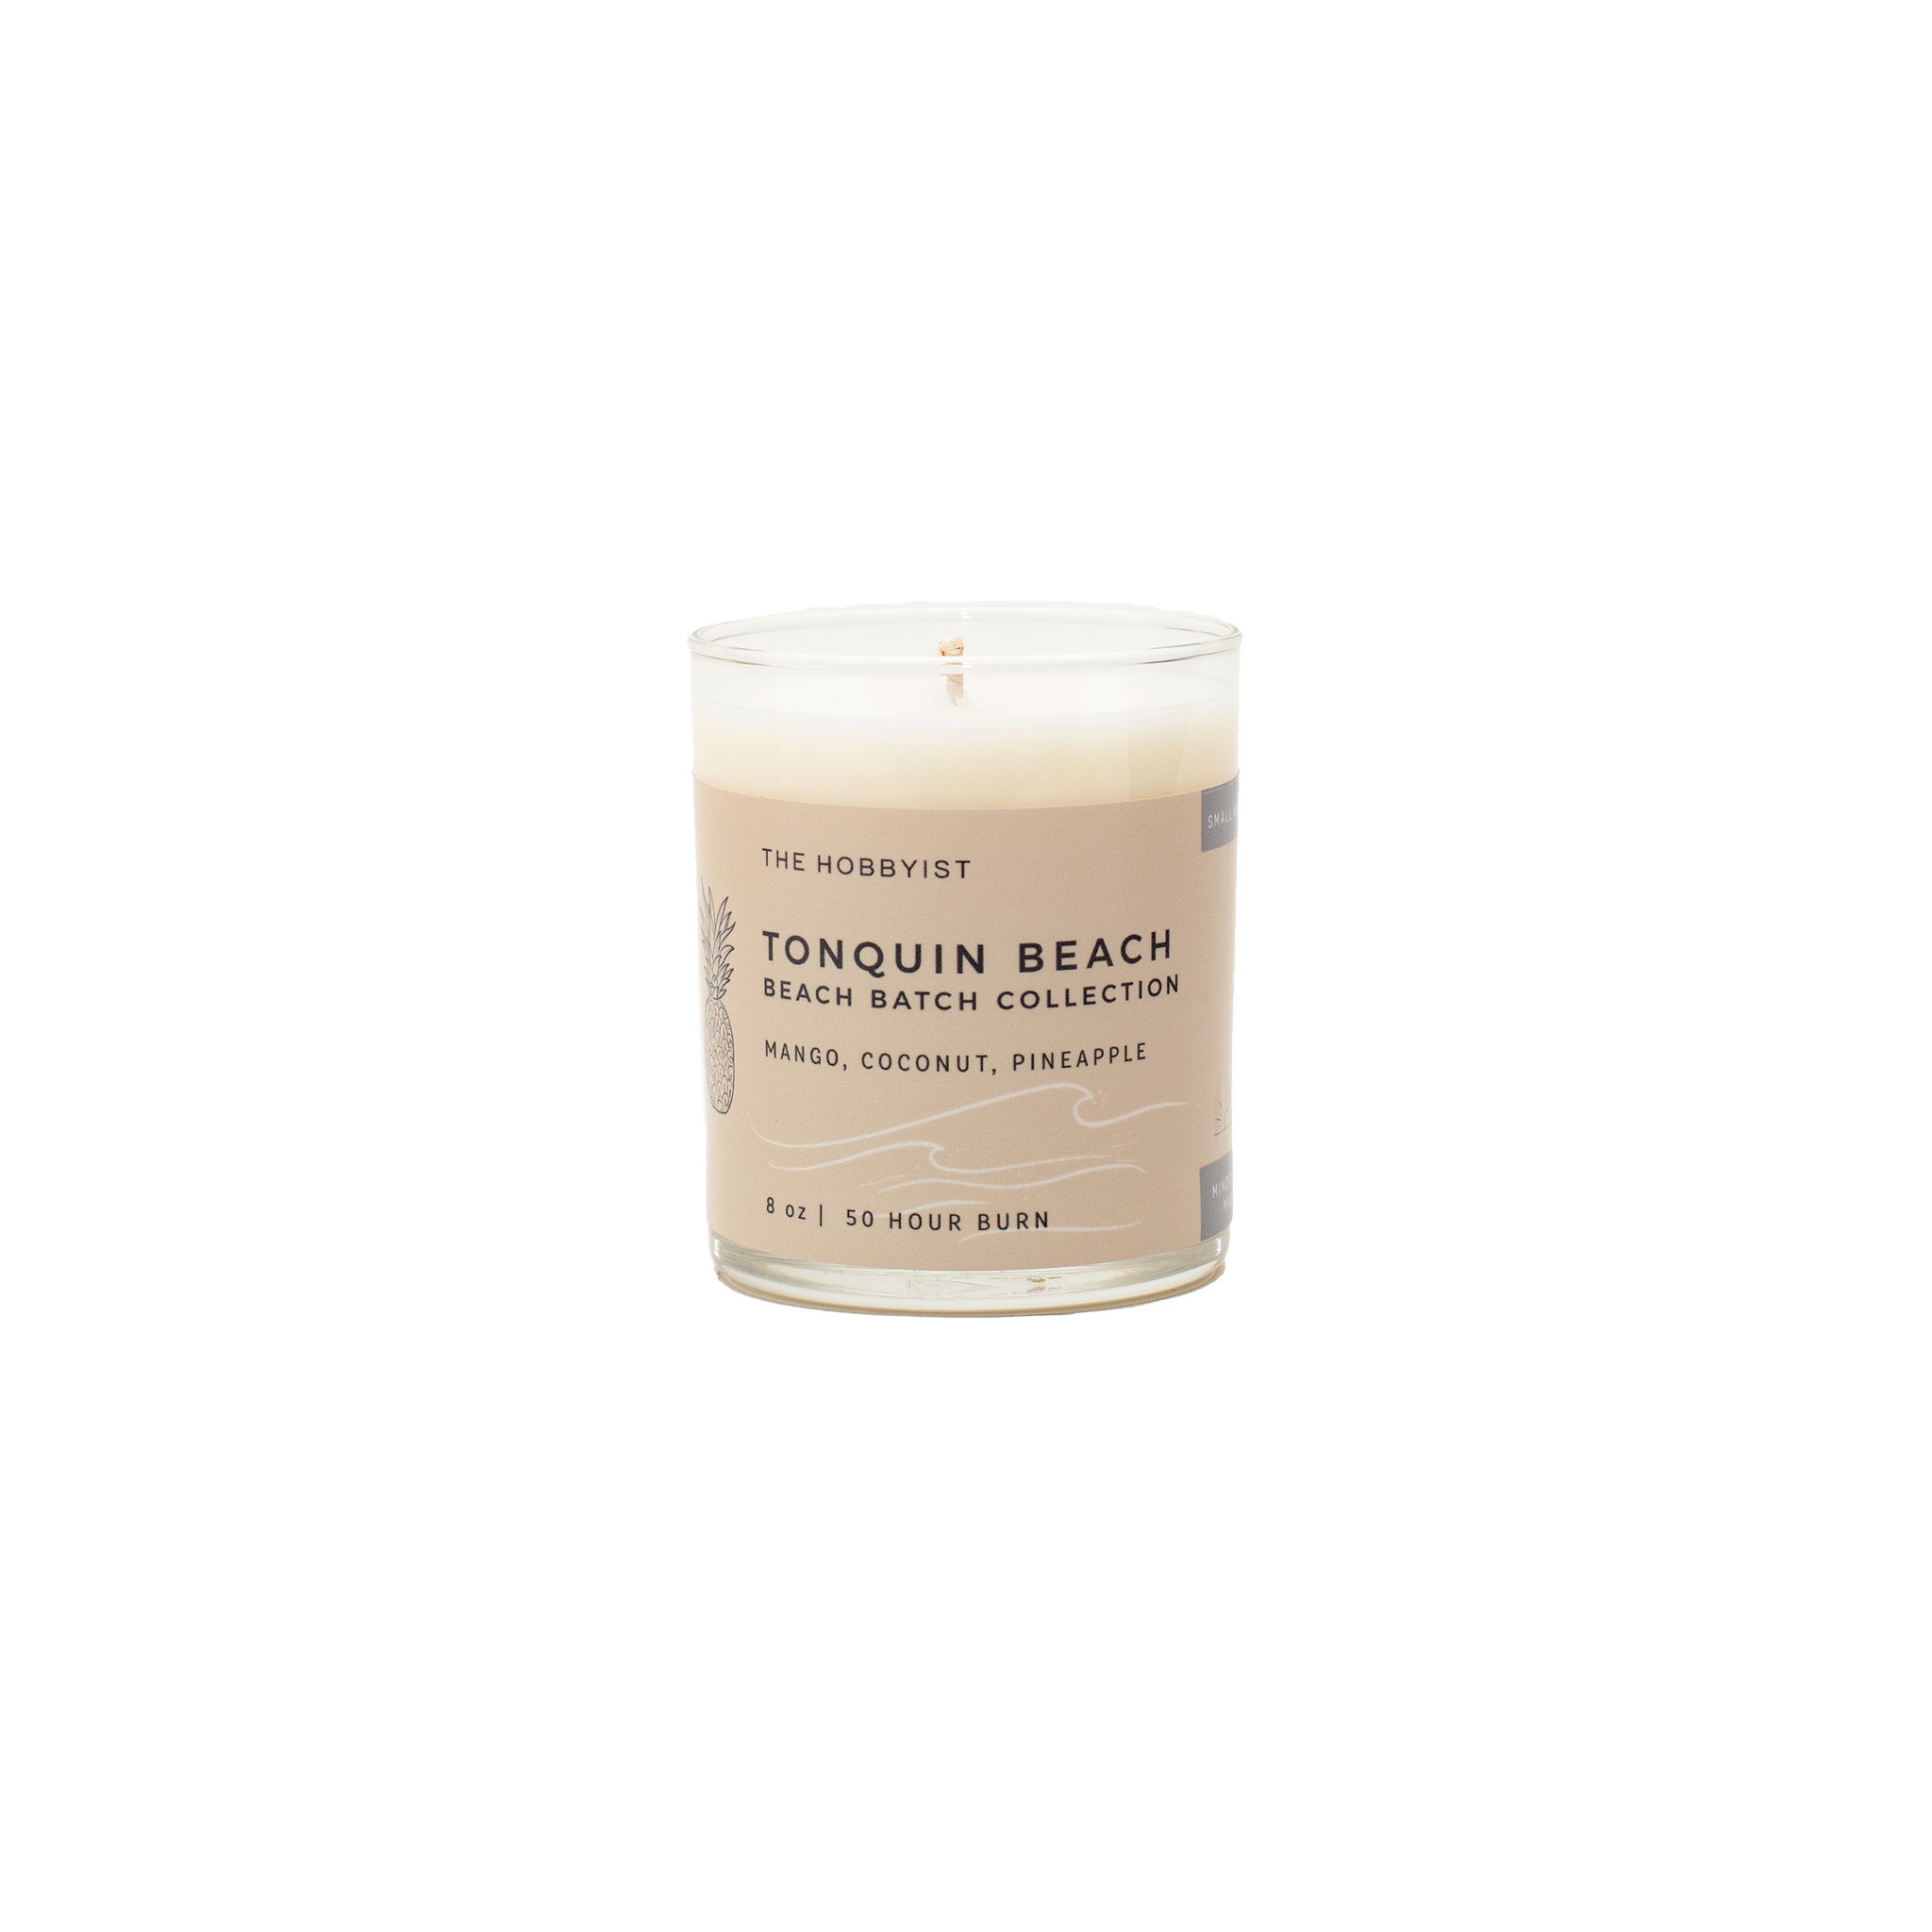 Product photo of the Tonquin Beach Candle from our Beach Batch Collection